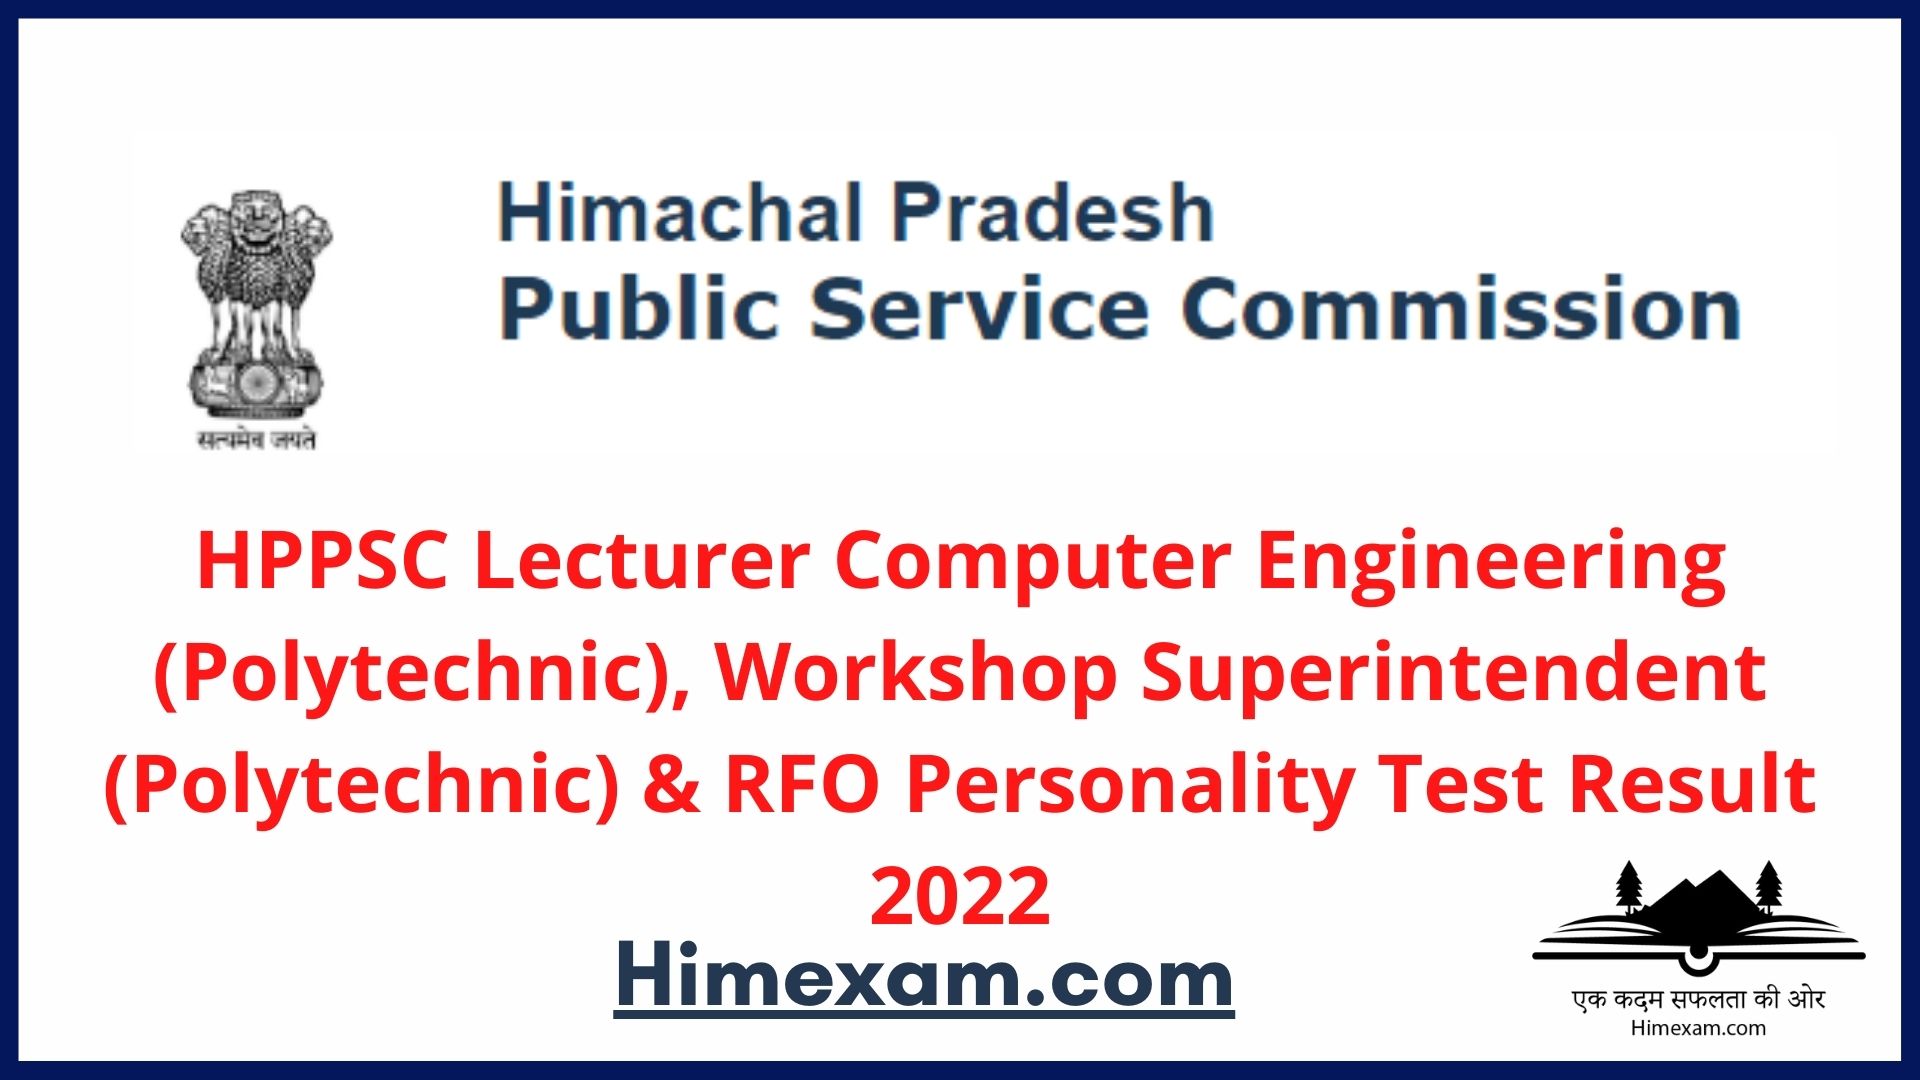 HPPSC Lecturer Computer Engineering (Polytechnic), Workshop Superintendent (Polytechnic) & RFO Personality Test Result 2022